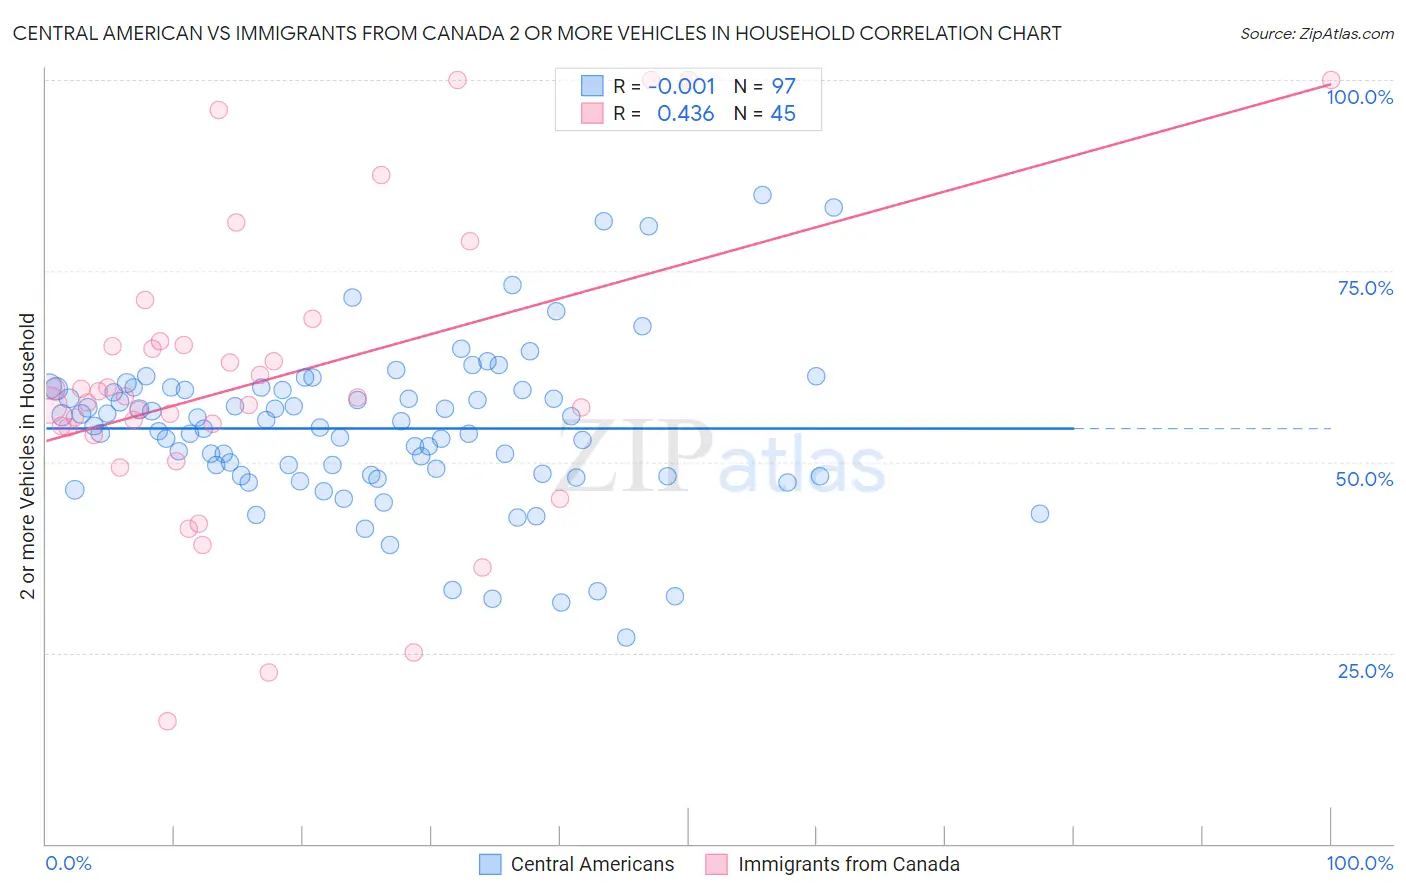 Central American vs Immigrants from Canada 2 or more Vehicles in Household